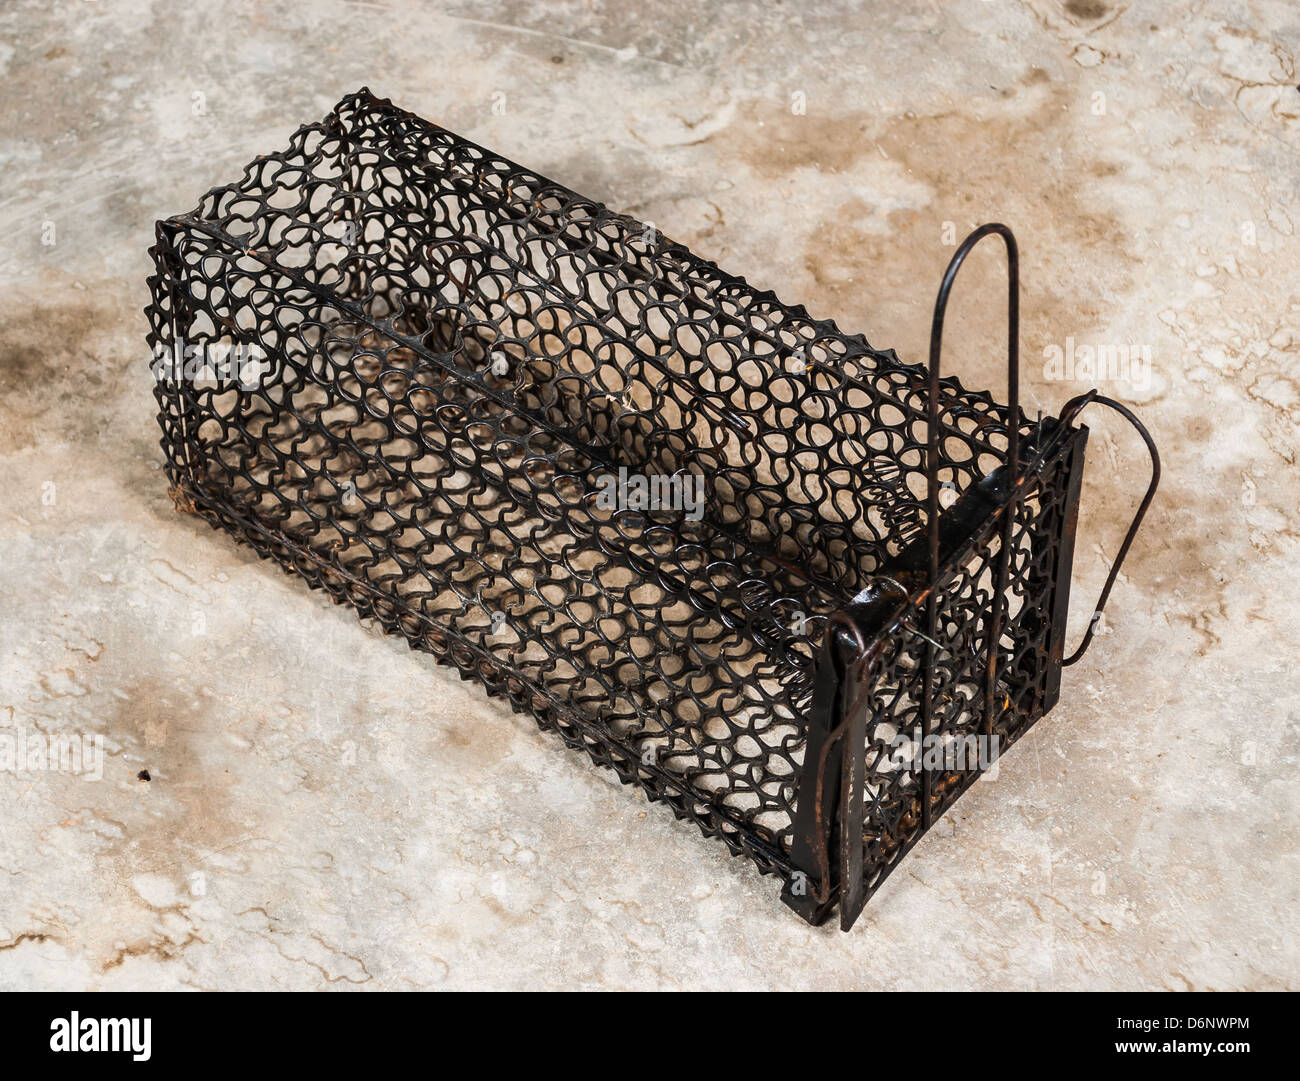 Black Mouse Trap on Dirty Floor Stock Photo